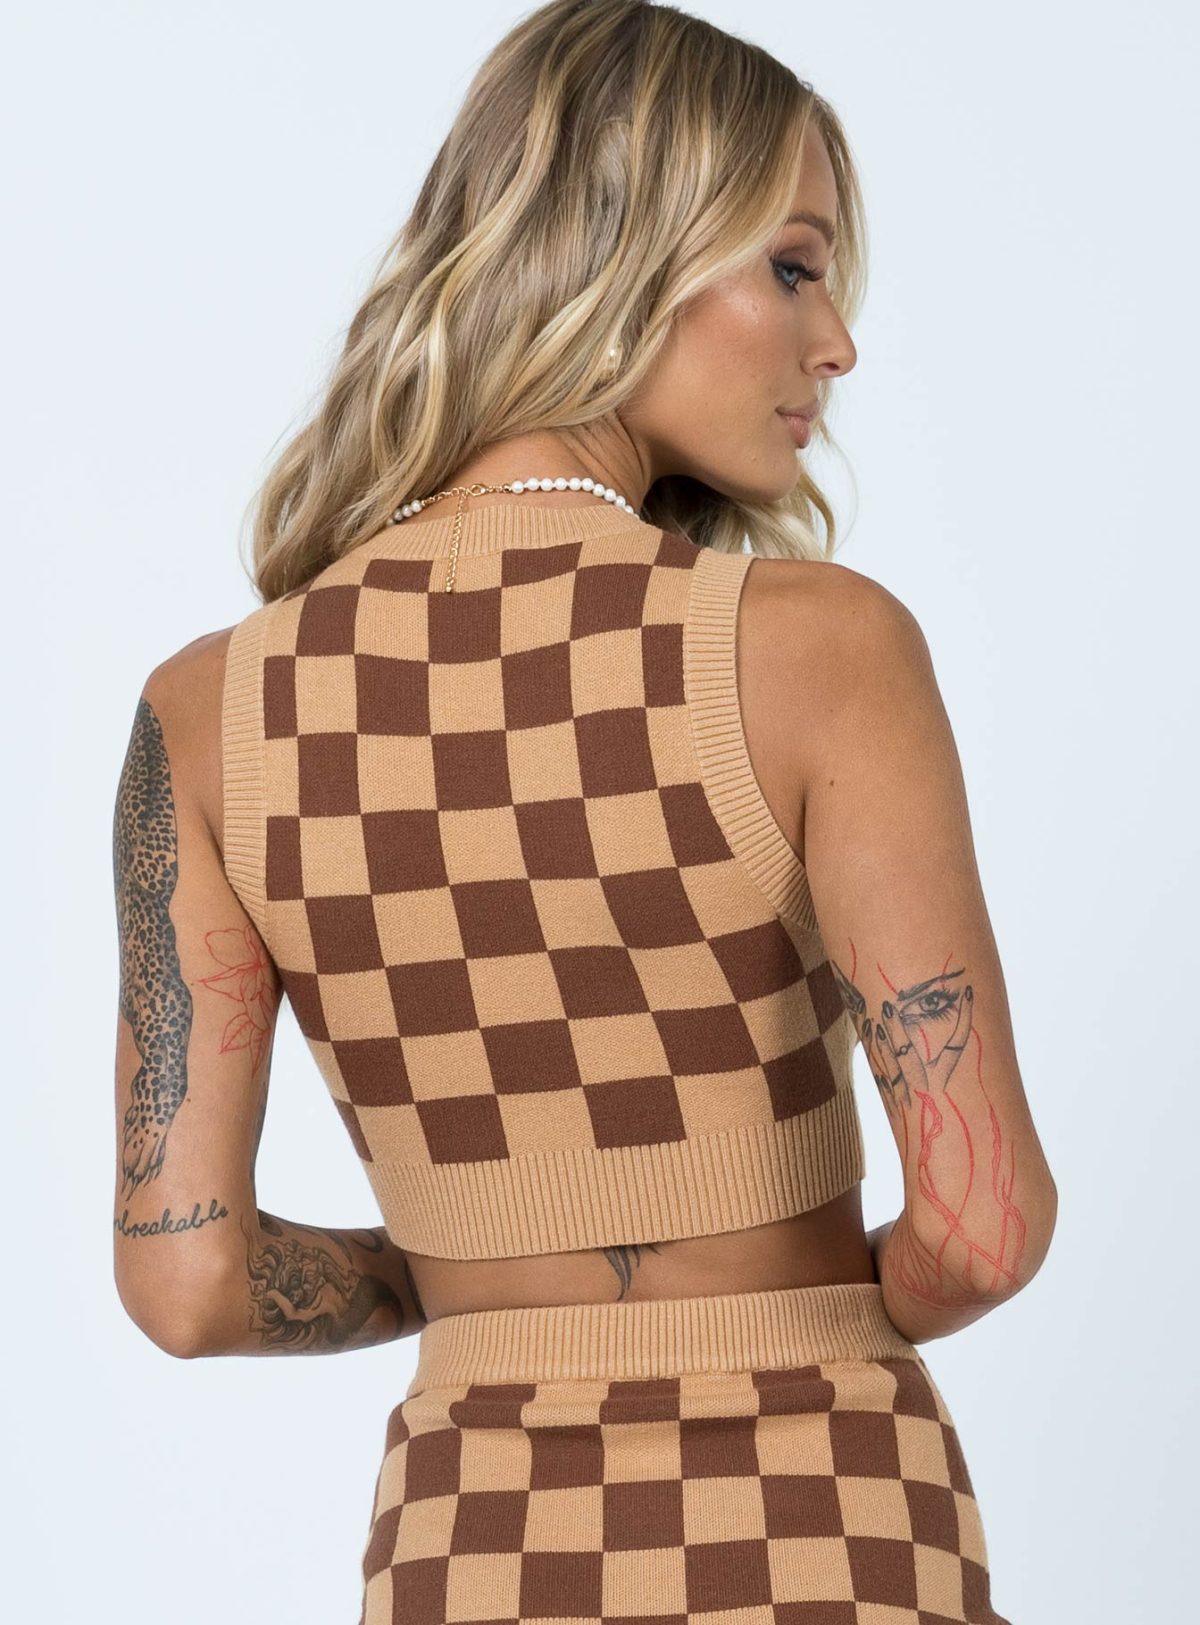 Chessboard Plaid Knitted Vest Top in T-shirts & Tops